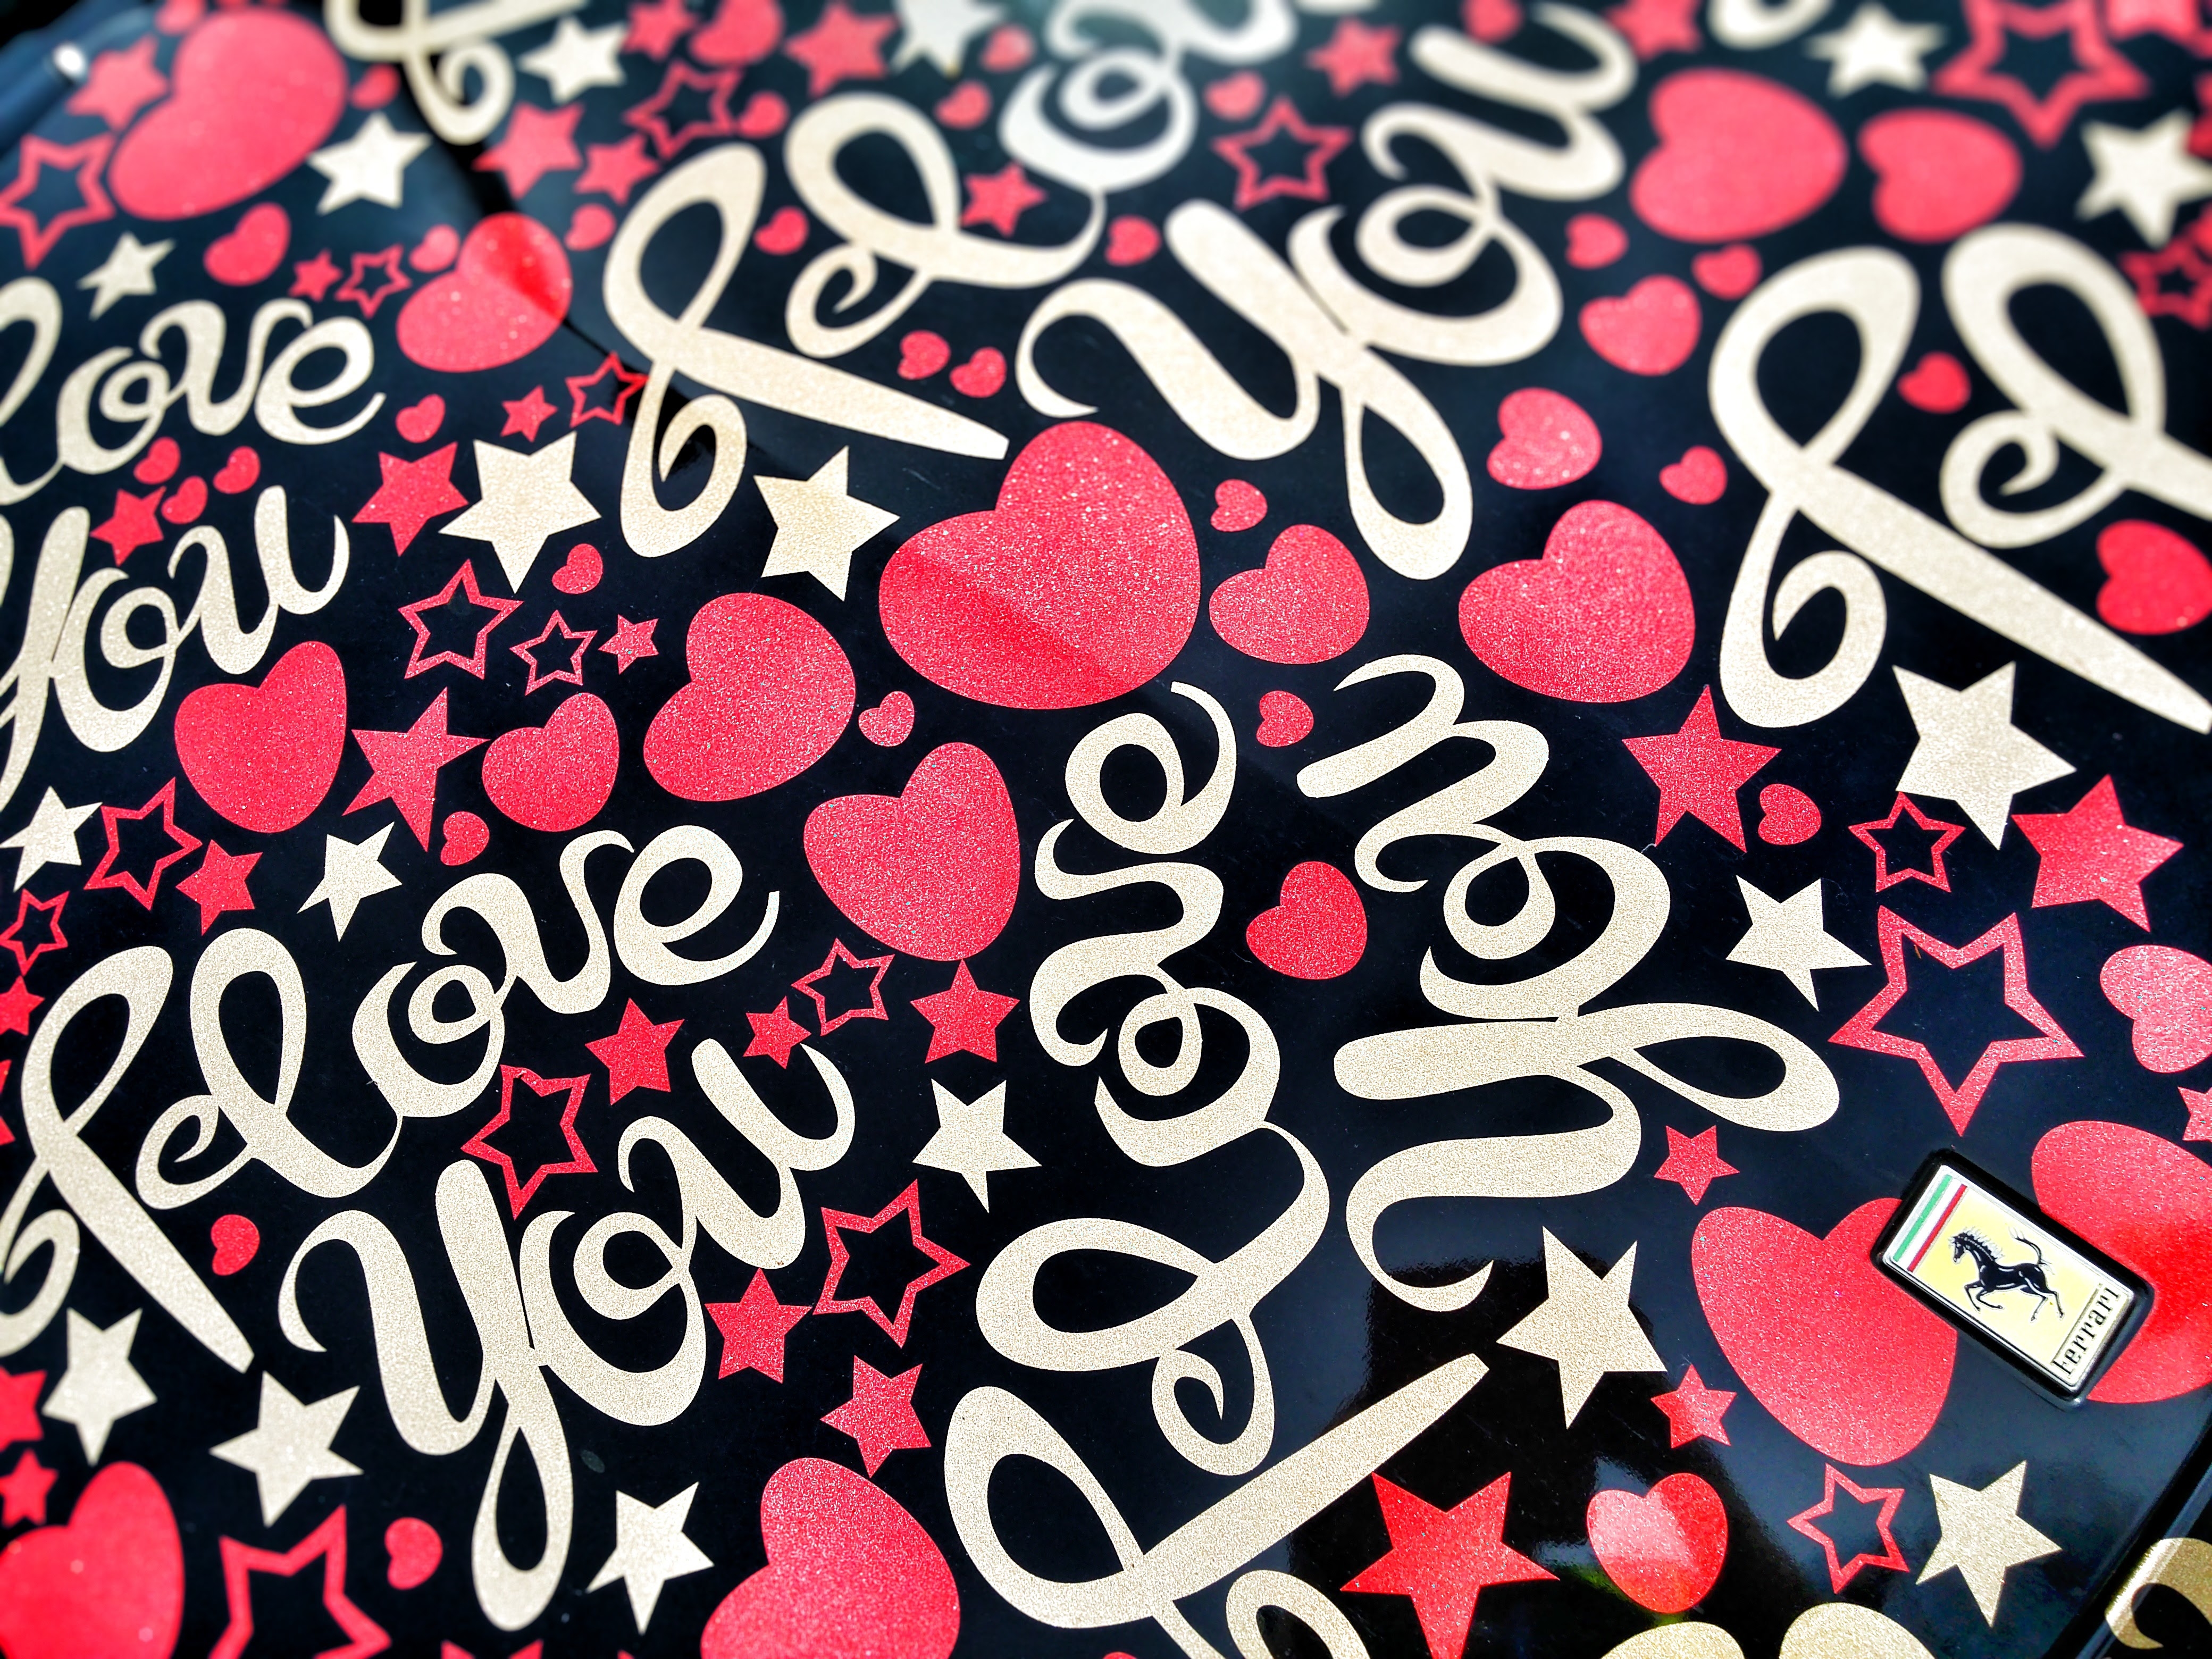 hearts, love, stars, words, paint, lettering, inscriptions